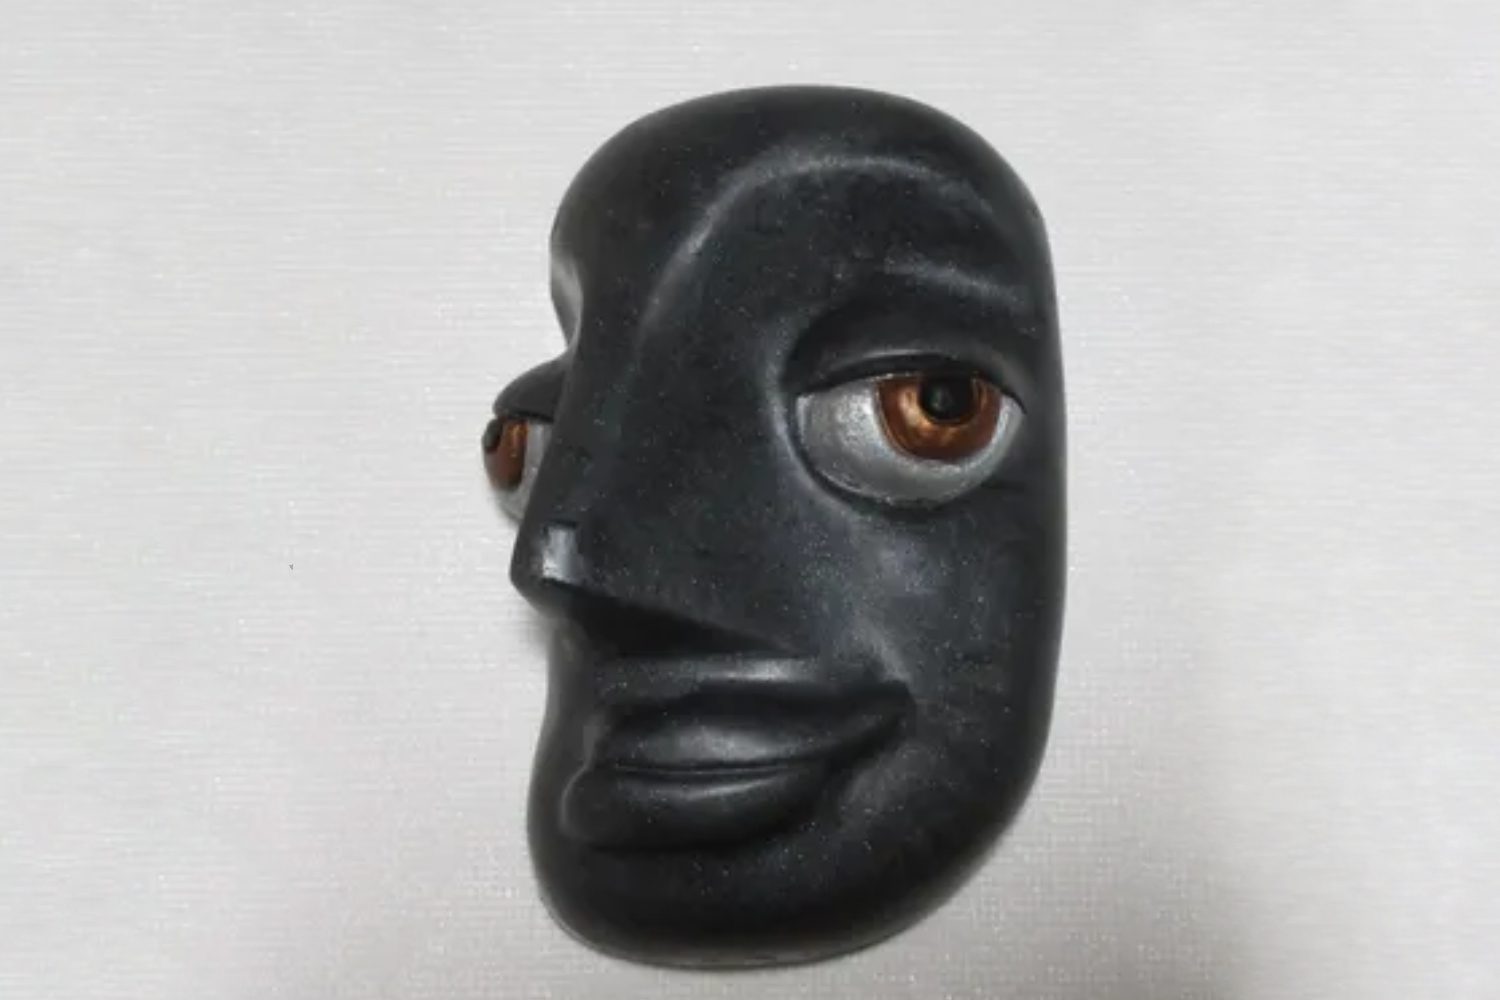 A black face with brown eyes and a nose.